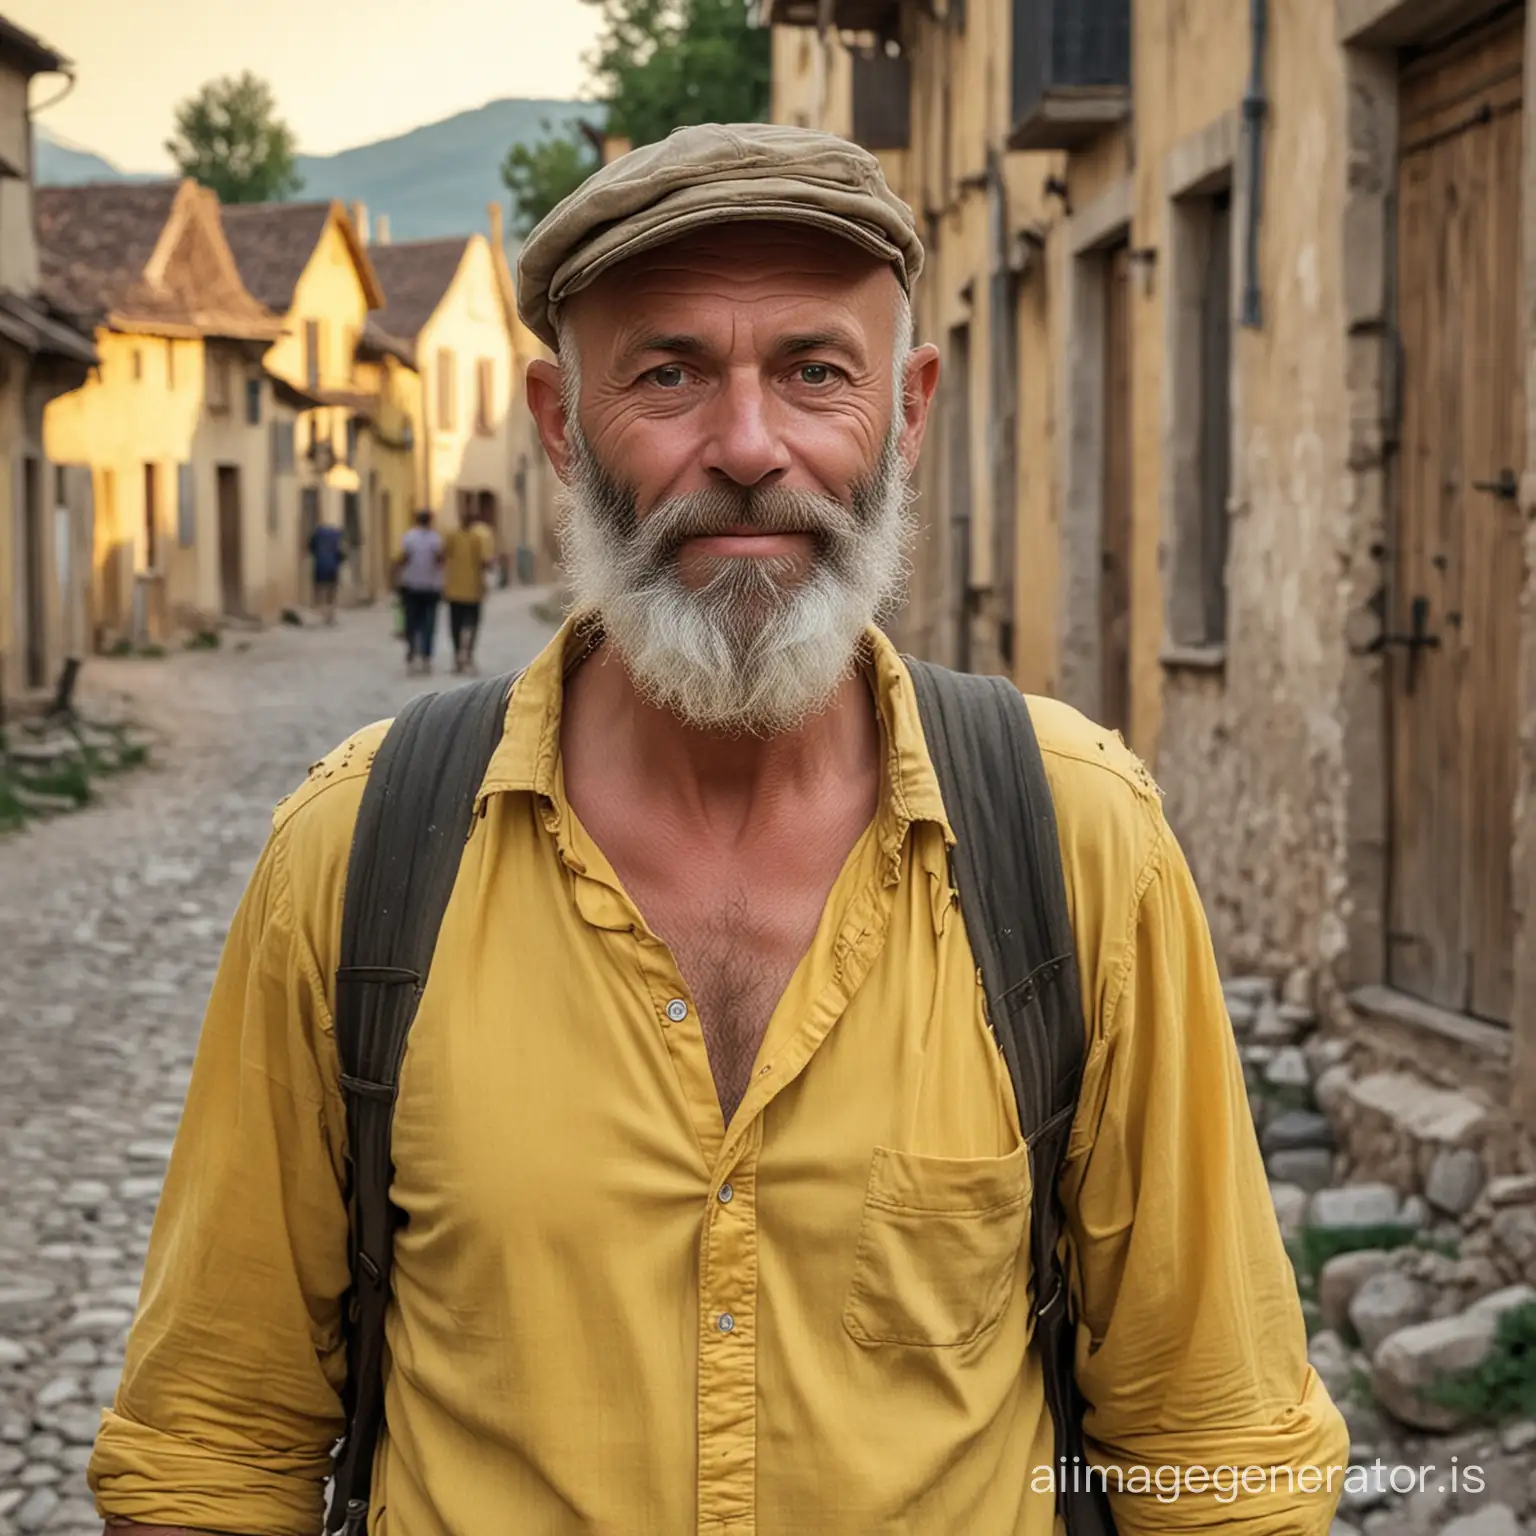 Man aged 50, bald and bearded. He wears a cap, a tattered yellow shirt, a blouse, a backpack and a wooden stick. He enters the town of Digne les Bains at sunset in the 19th century